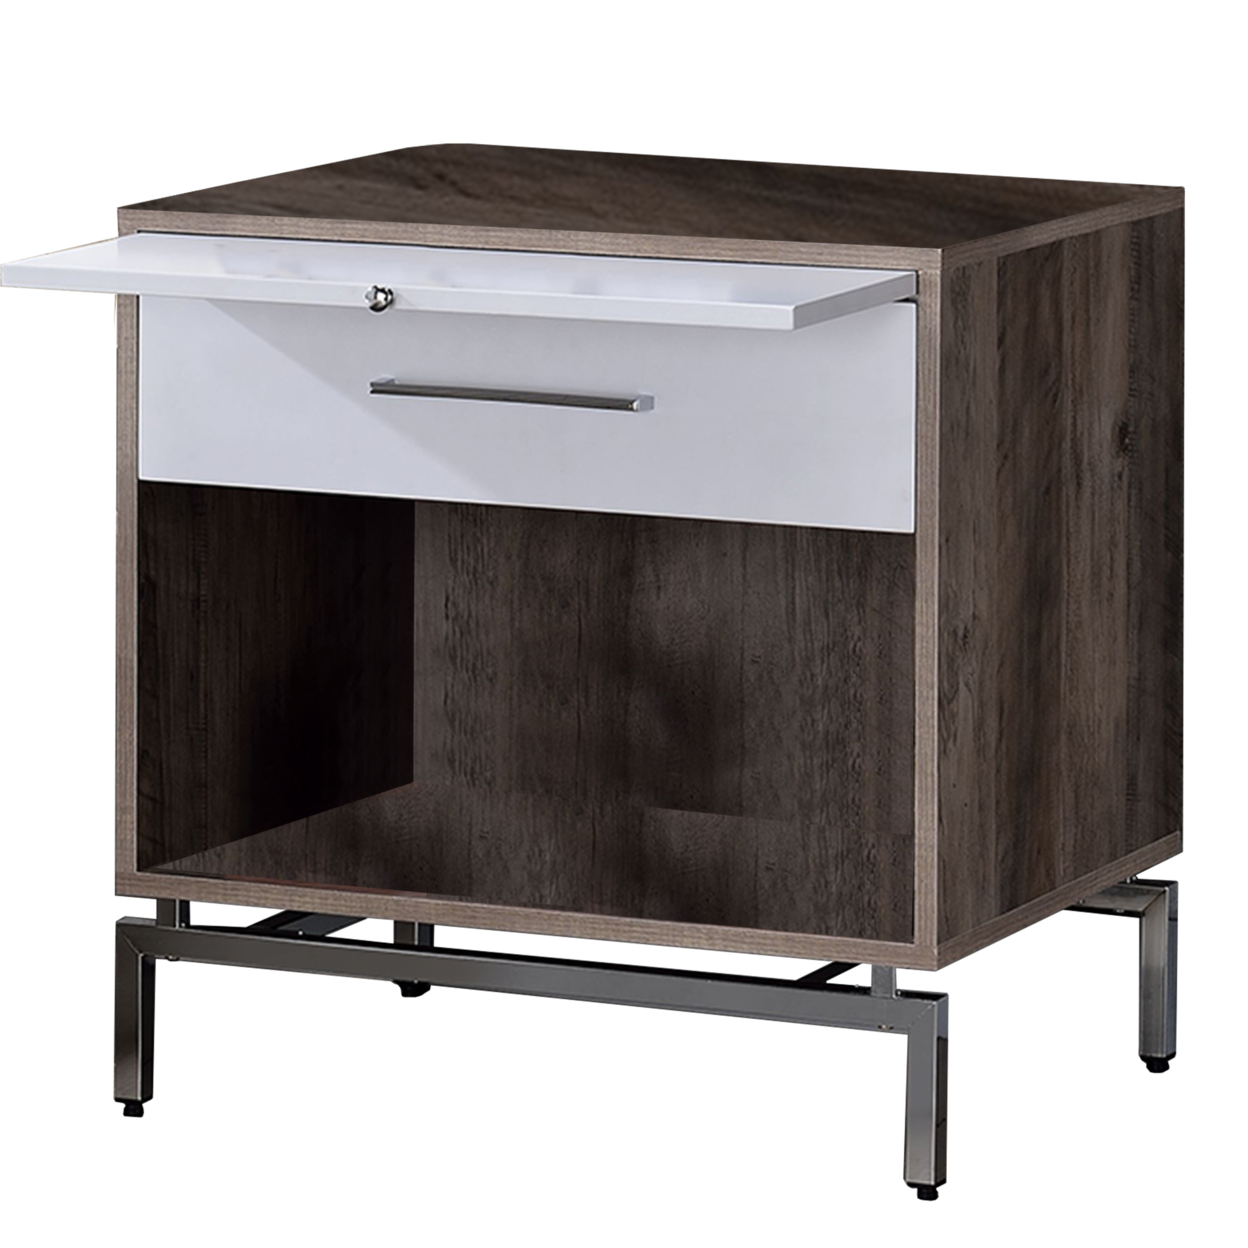 Wooden Accent Table With Open Storage And Pull Out Tray, Brown And White- Saltoro Sherpi